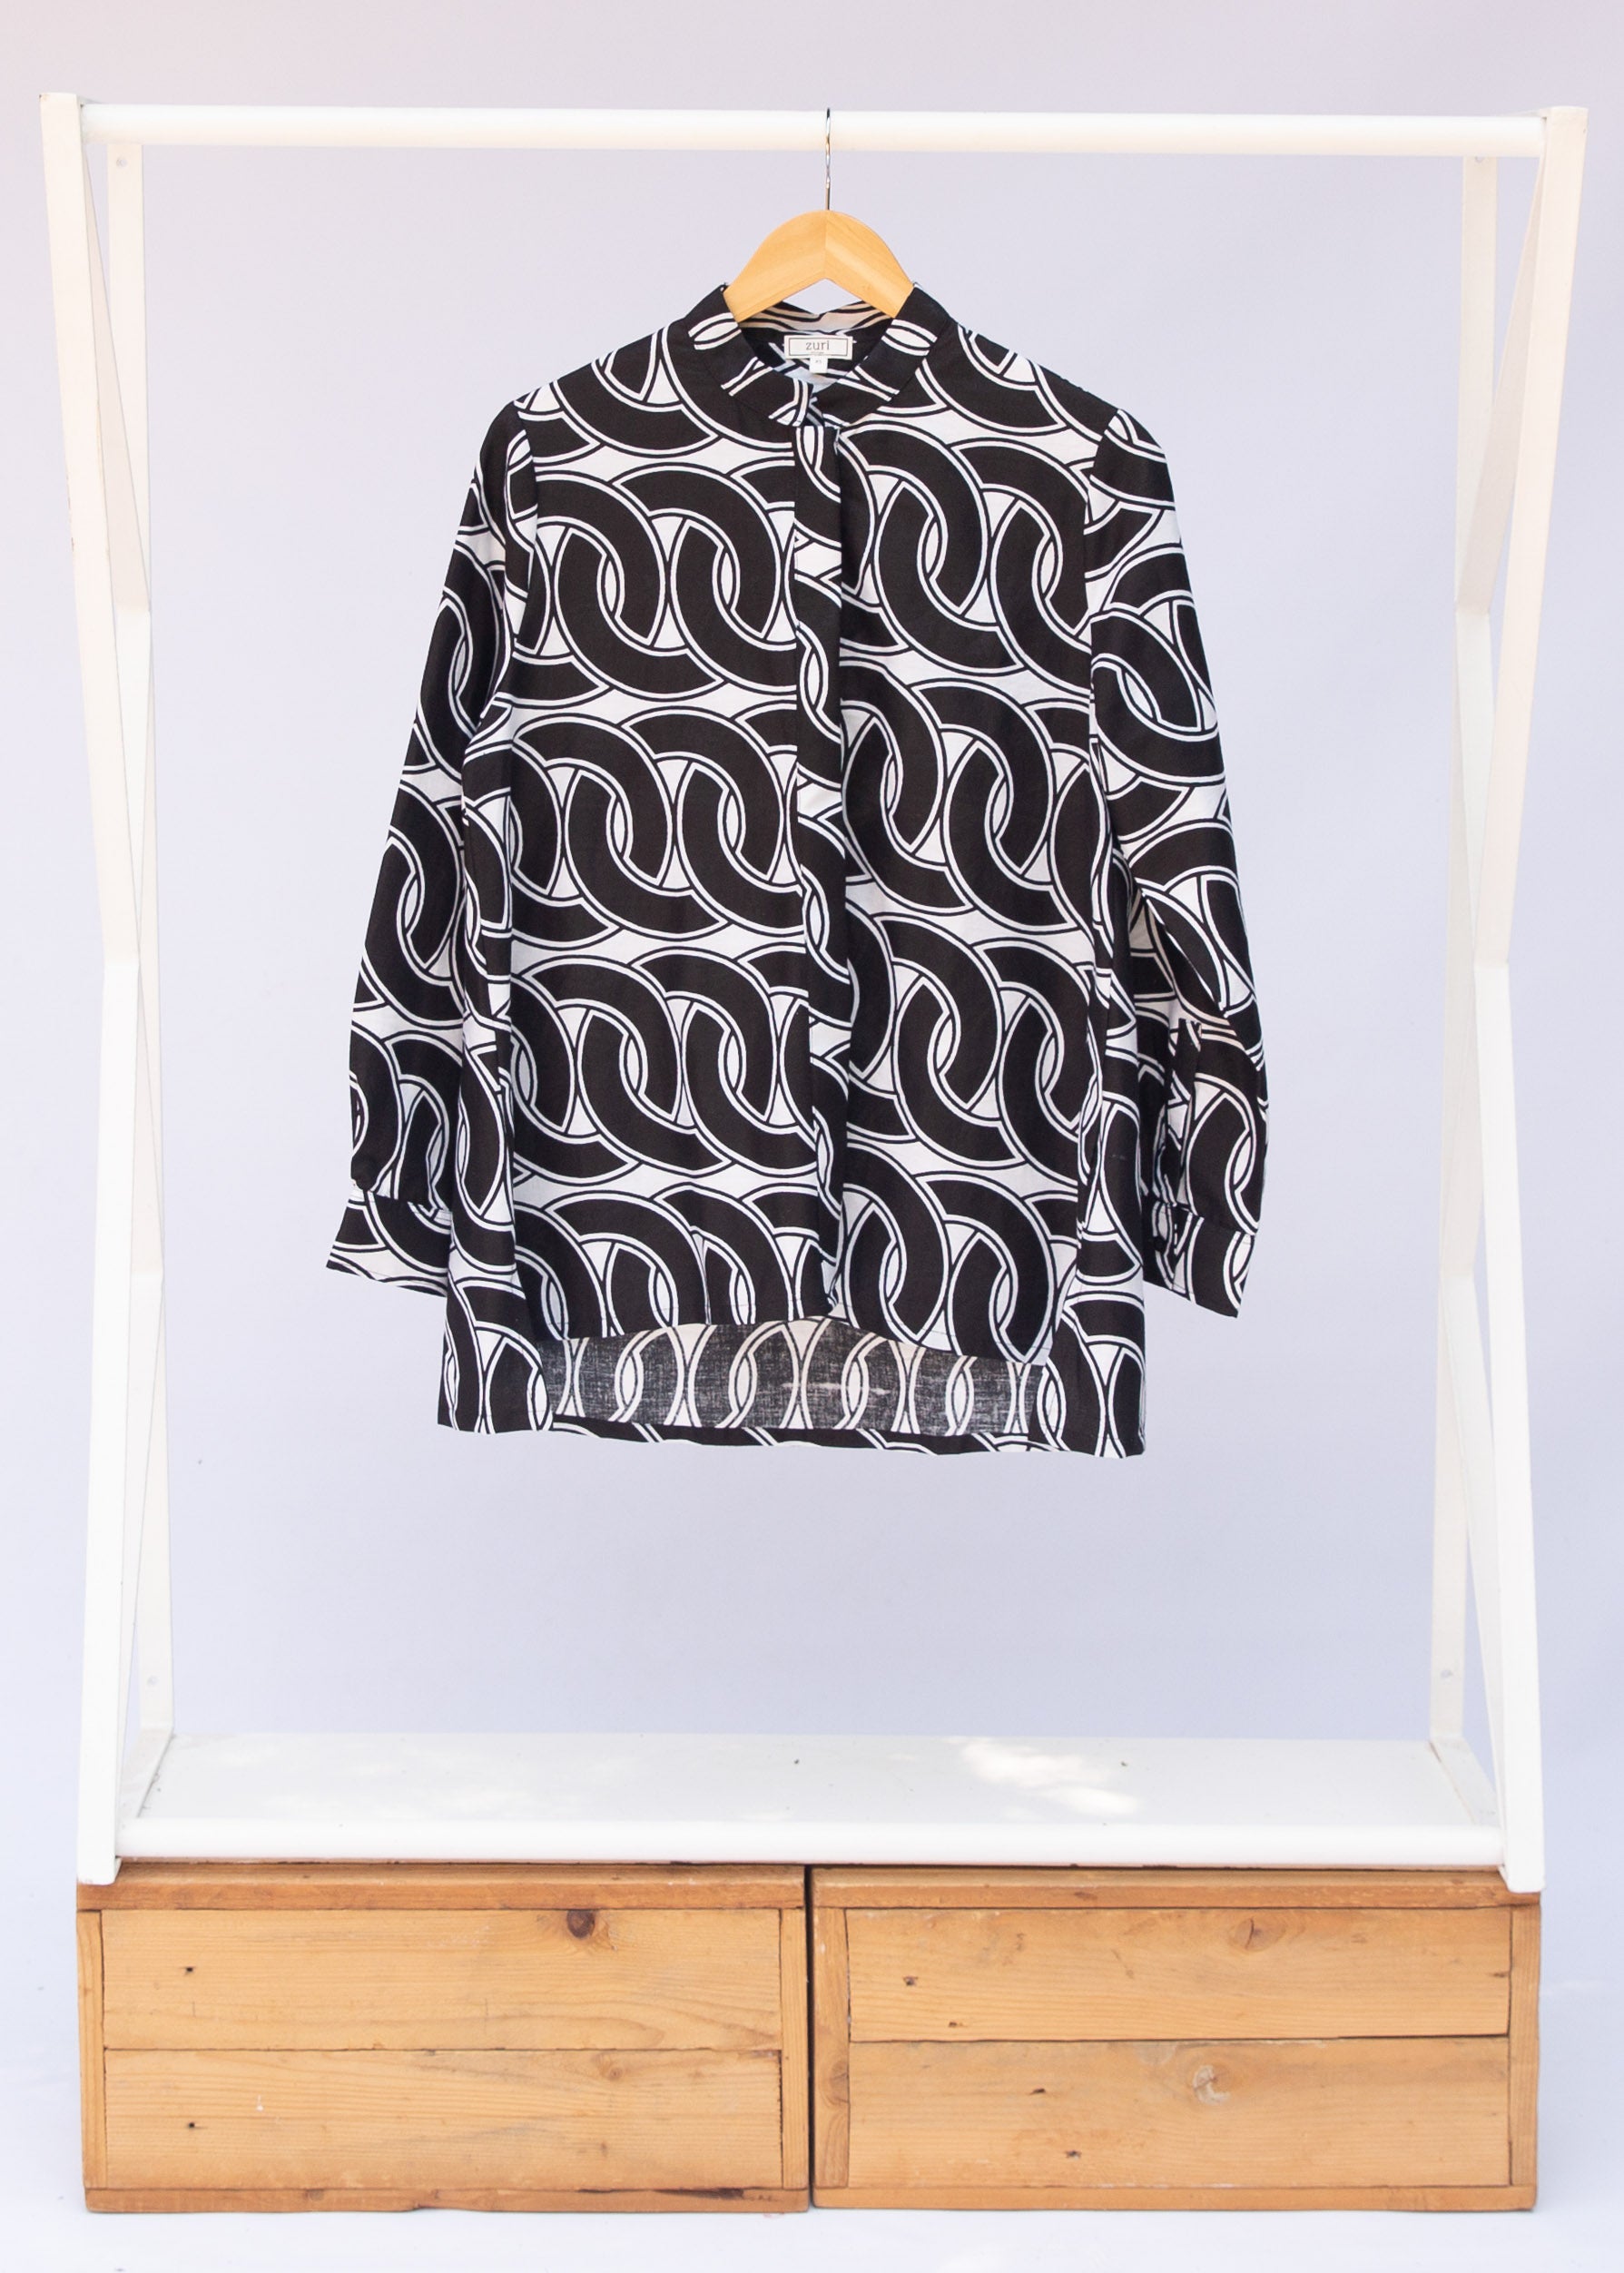 Display of black and white chain link shirt.